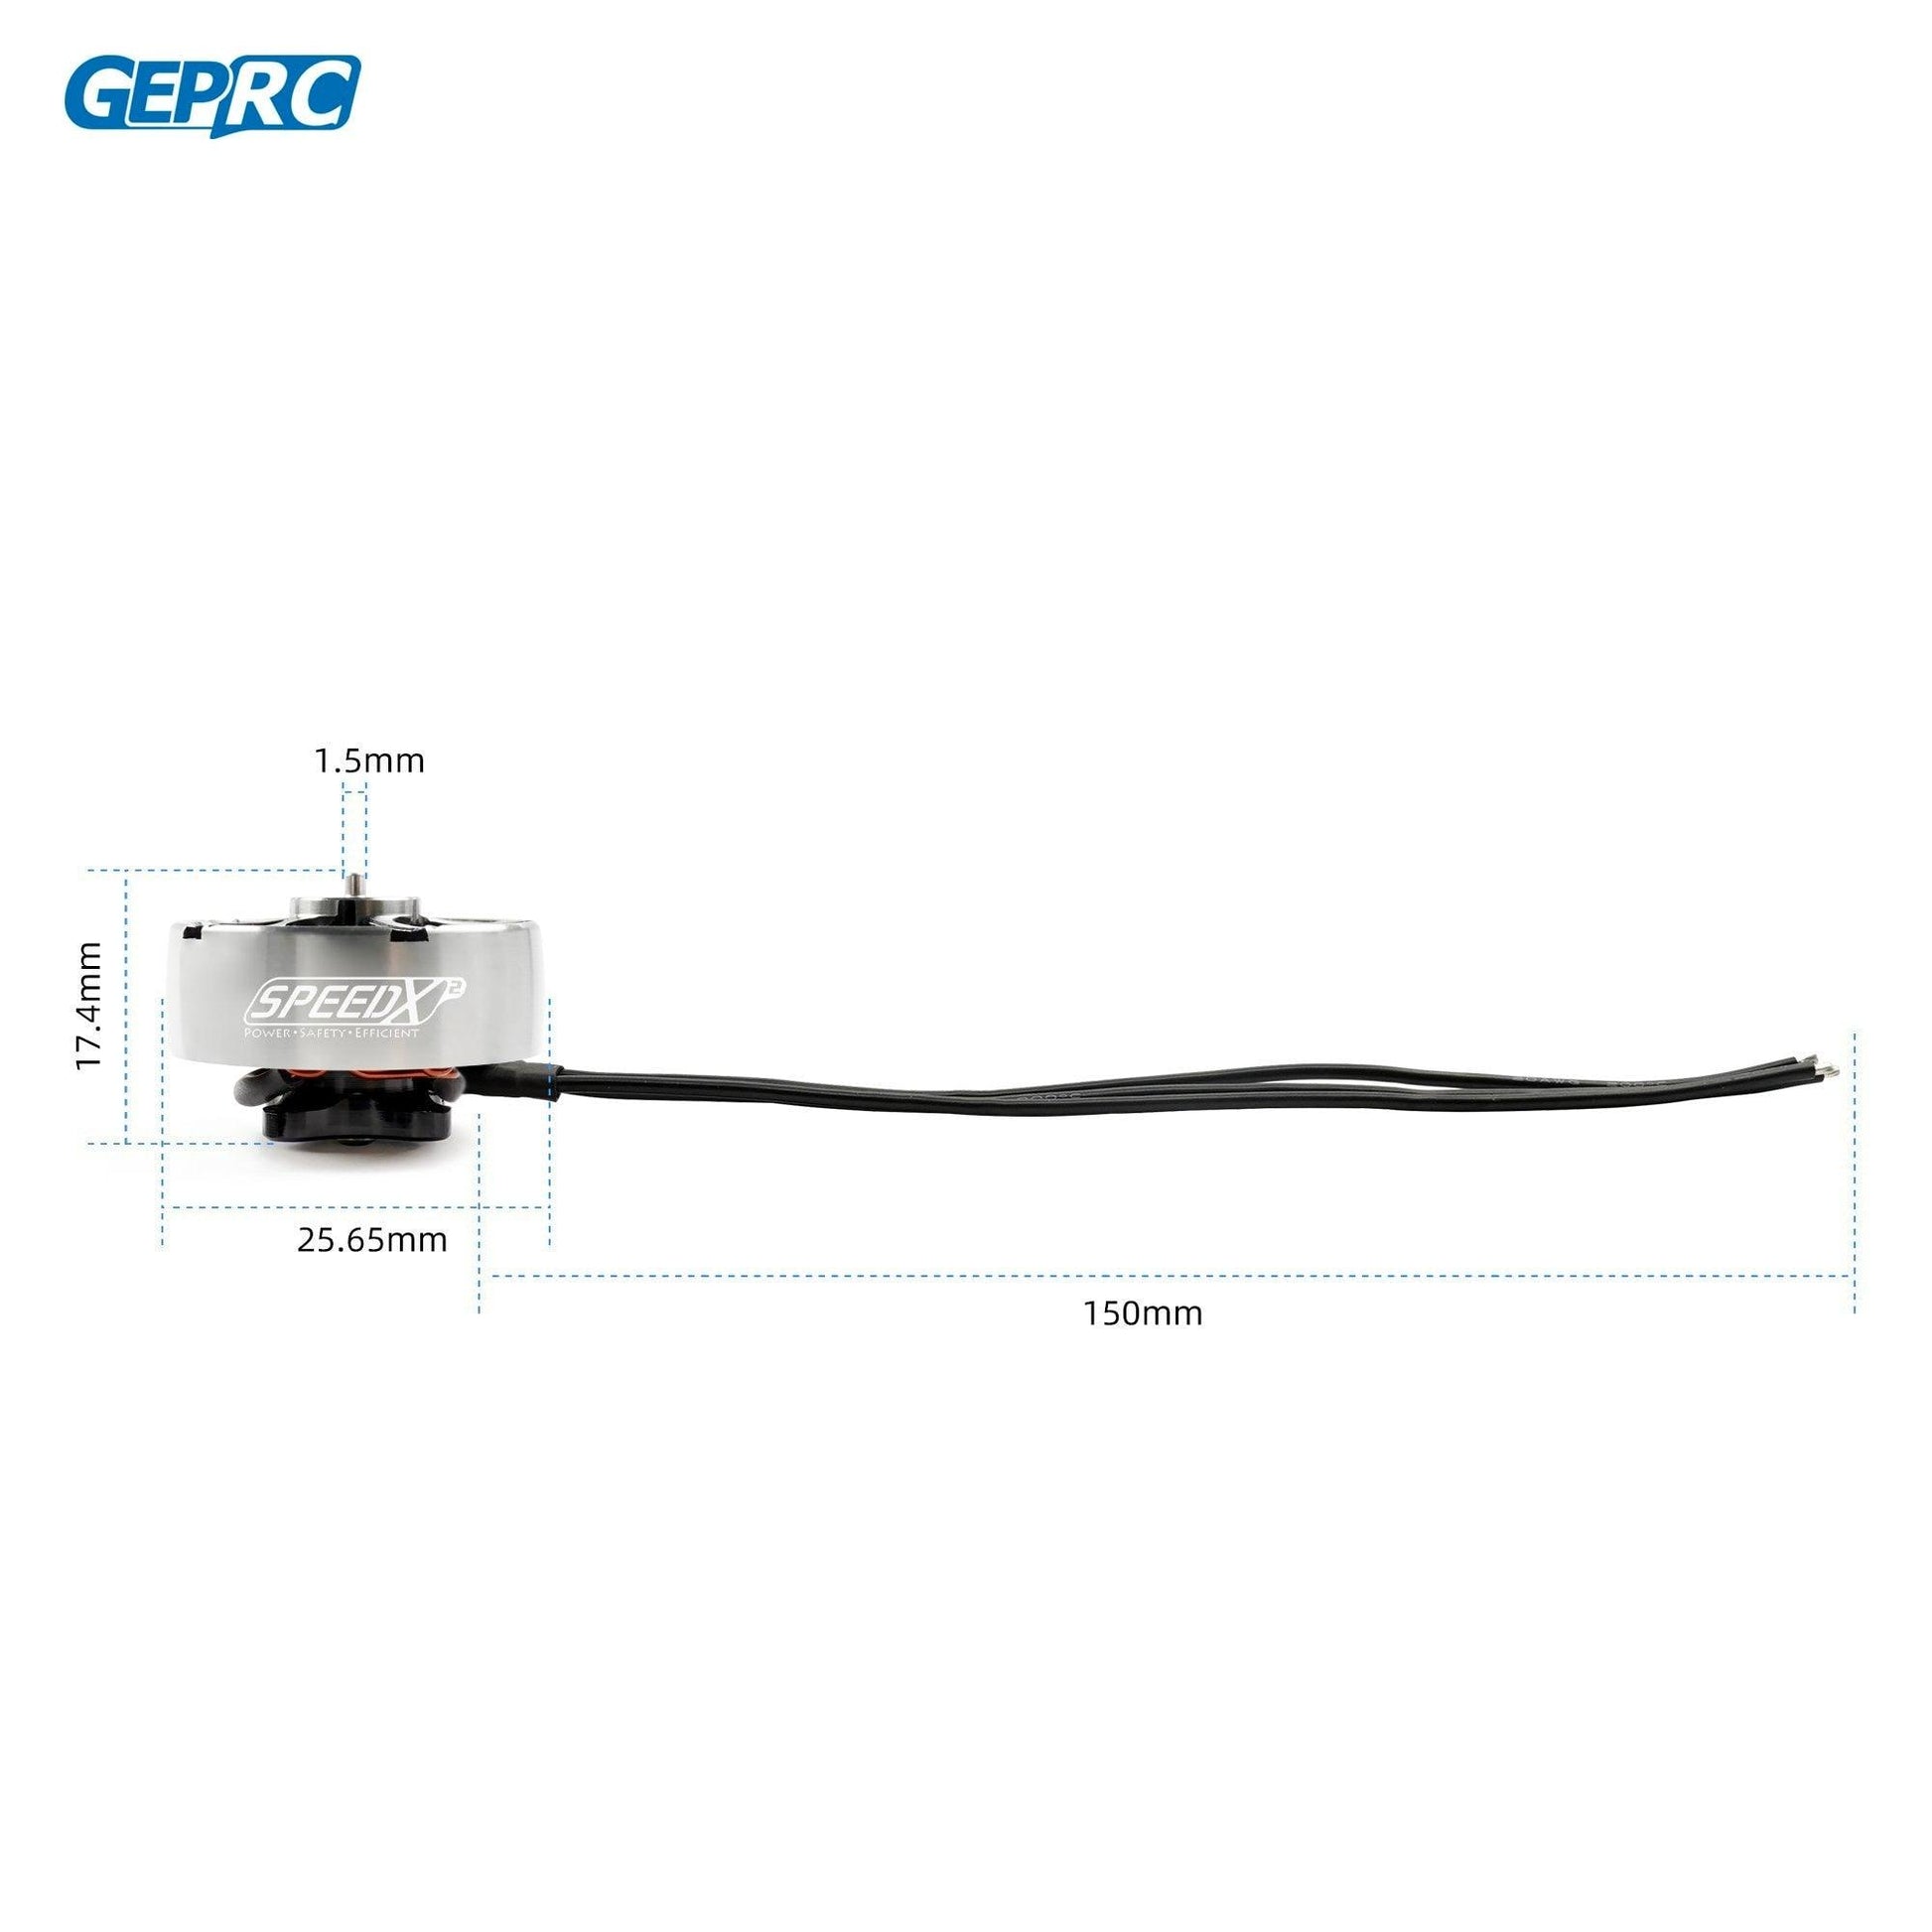 GEPRC SPEEDX2 Motor - 2105.5 2650KV/3450KV Motor Suitable Cinelog35 Series Drone For DIY RC FPV Quadcopter Freestyle Drone Accessories - RCDrone